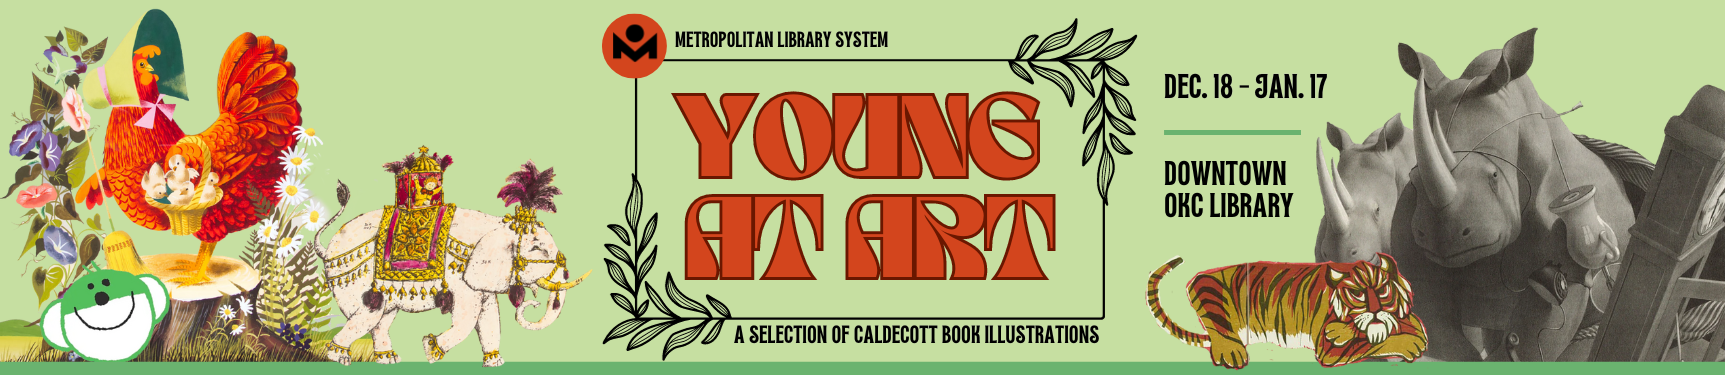 Metropolitan Library System Young at Art: A Collection of Caldecott Book Illustrations December 18 through January 17 Downtown OKC Library.